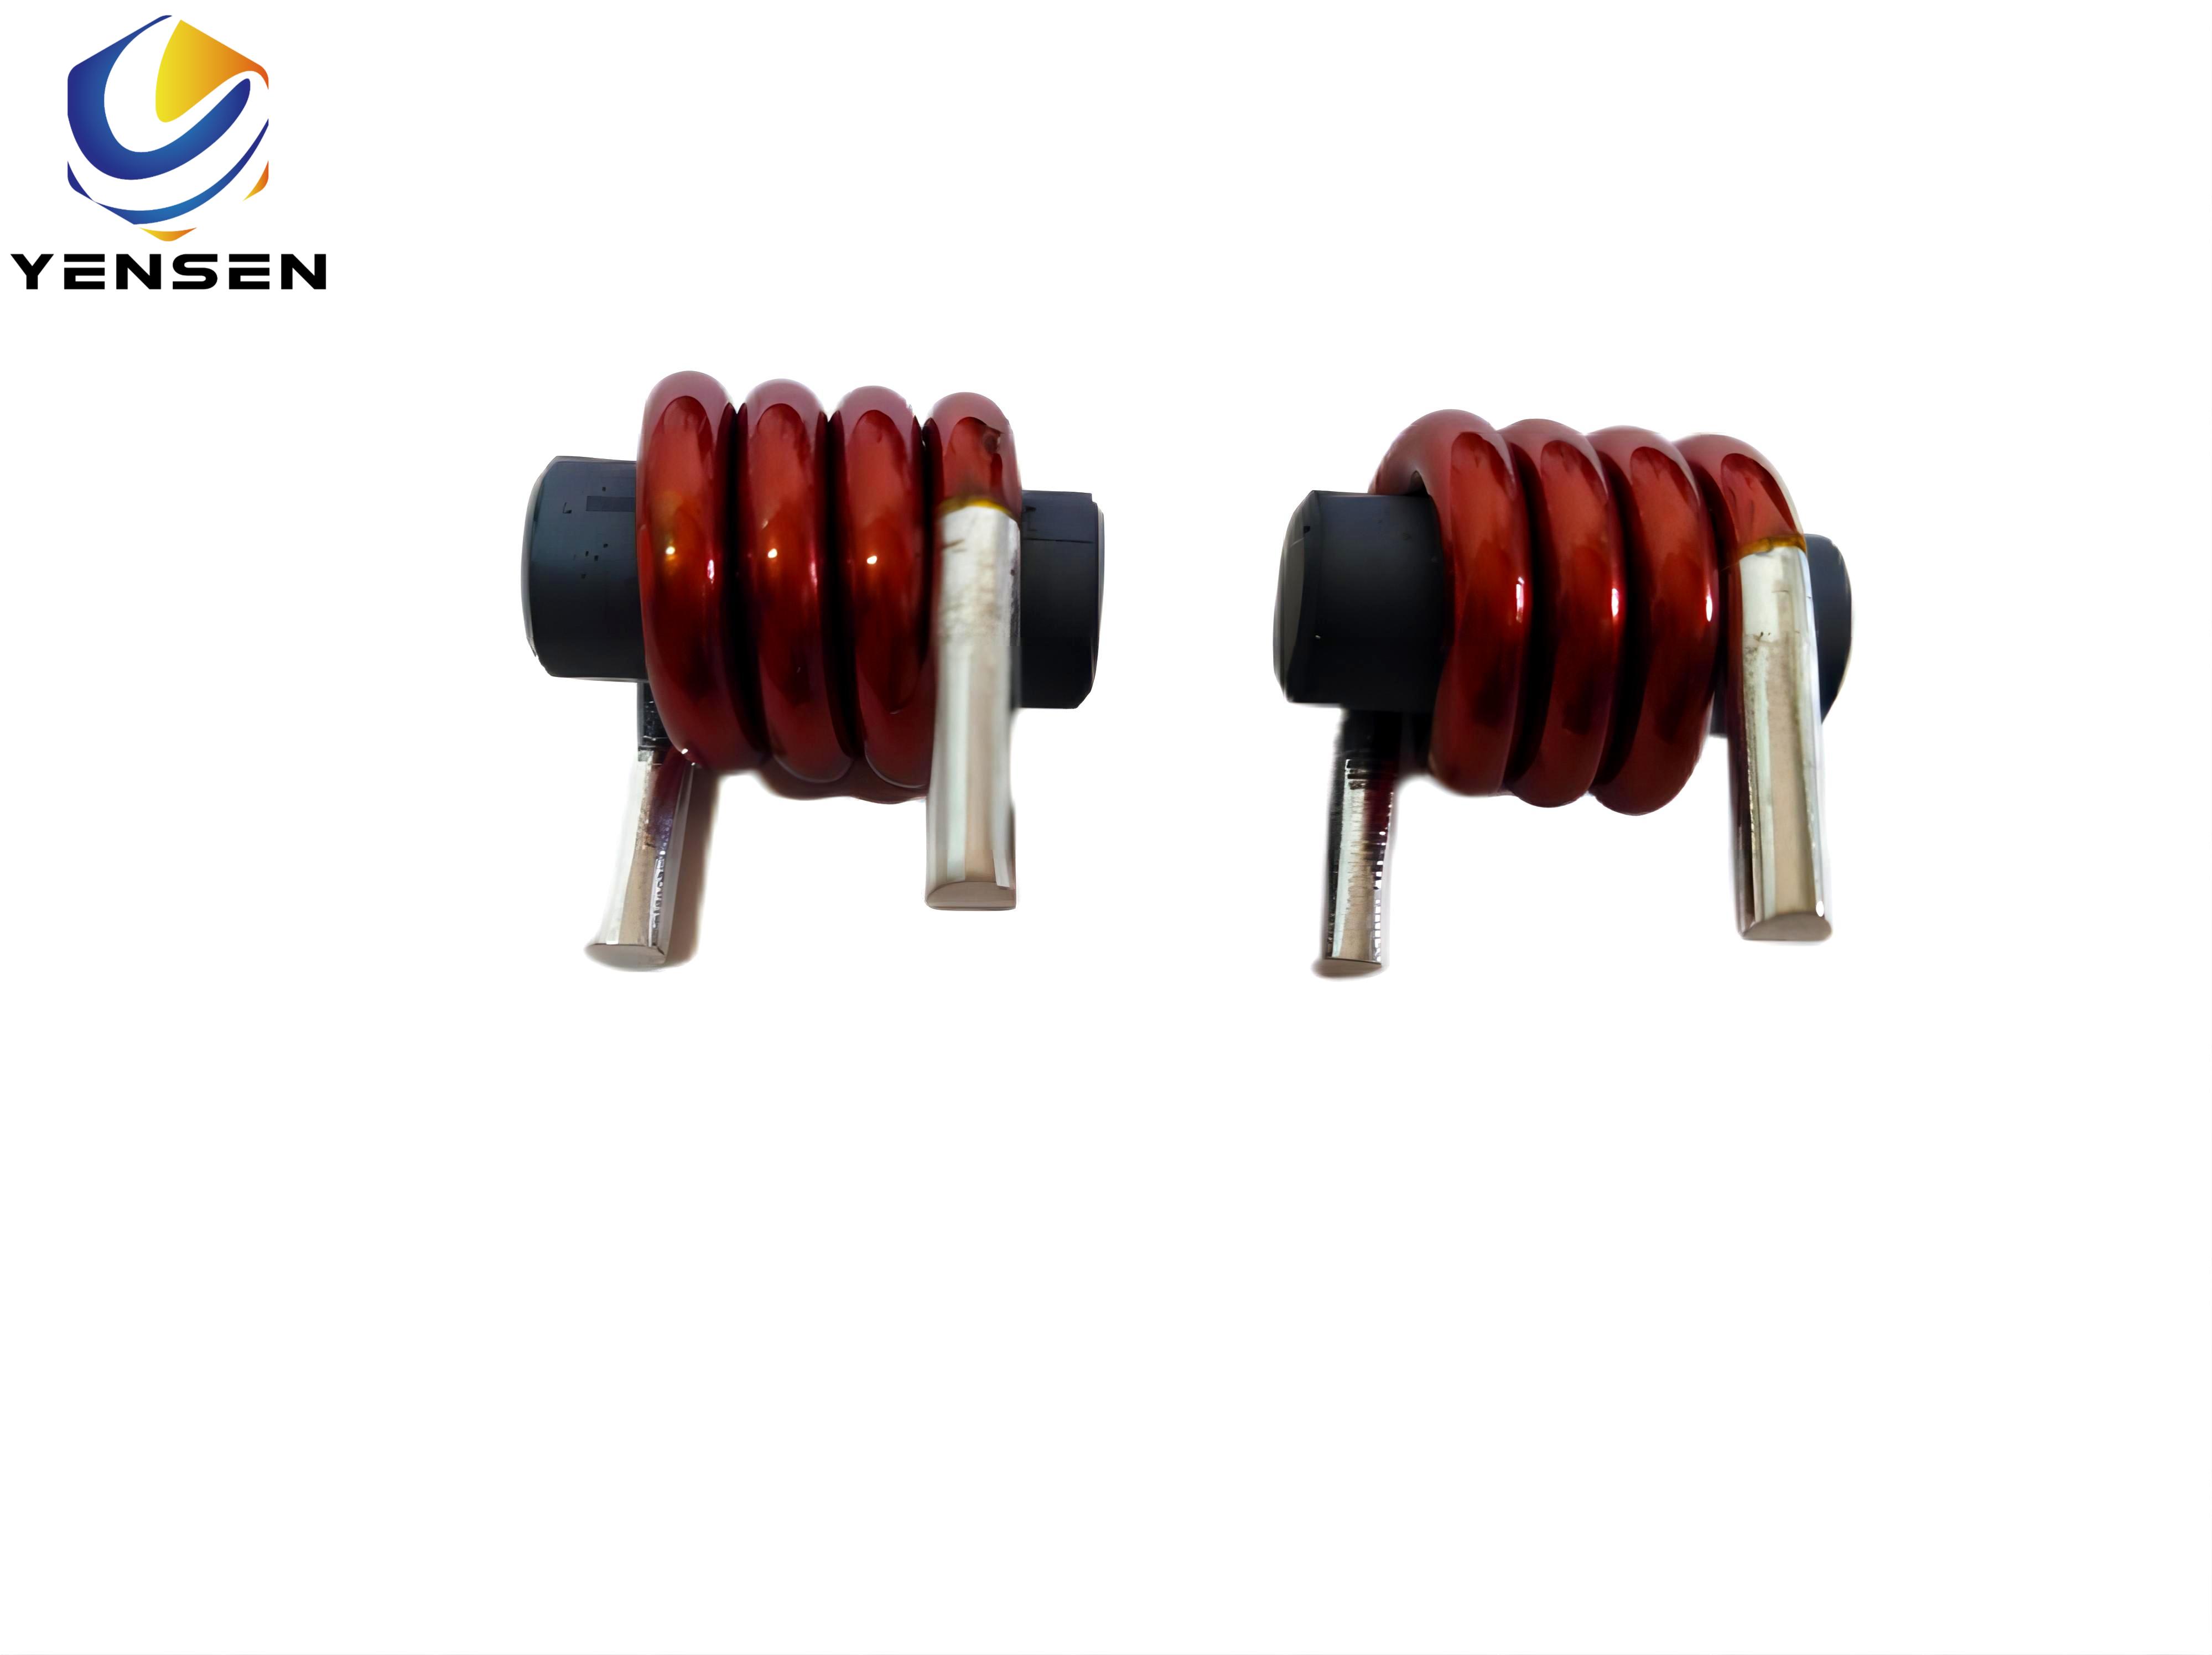 R0420 Bar Core Magnetic Choke Coils Power Inductor